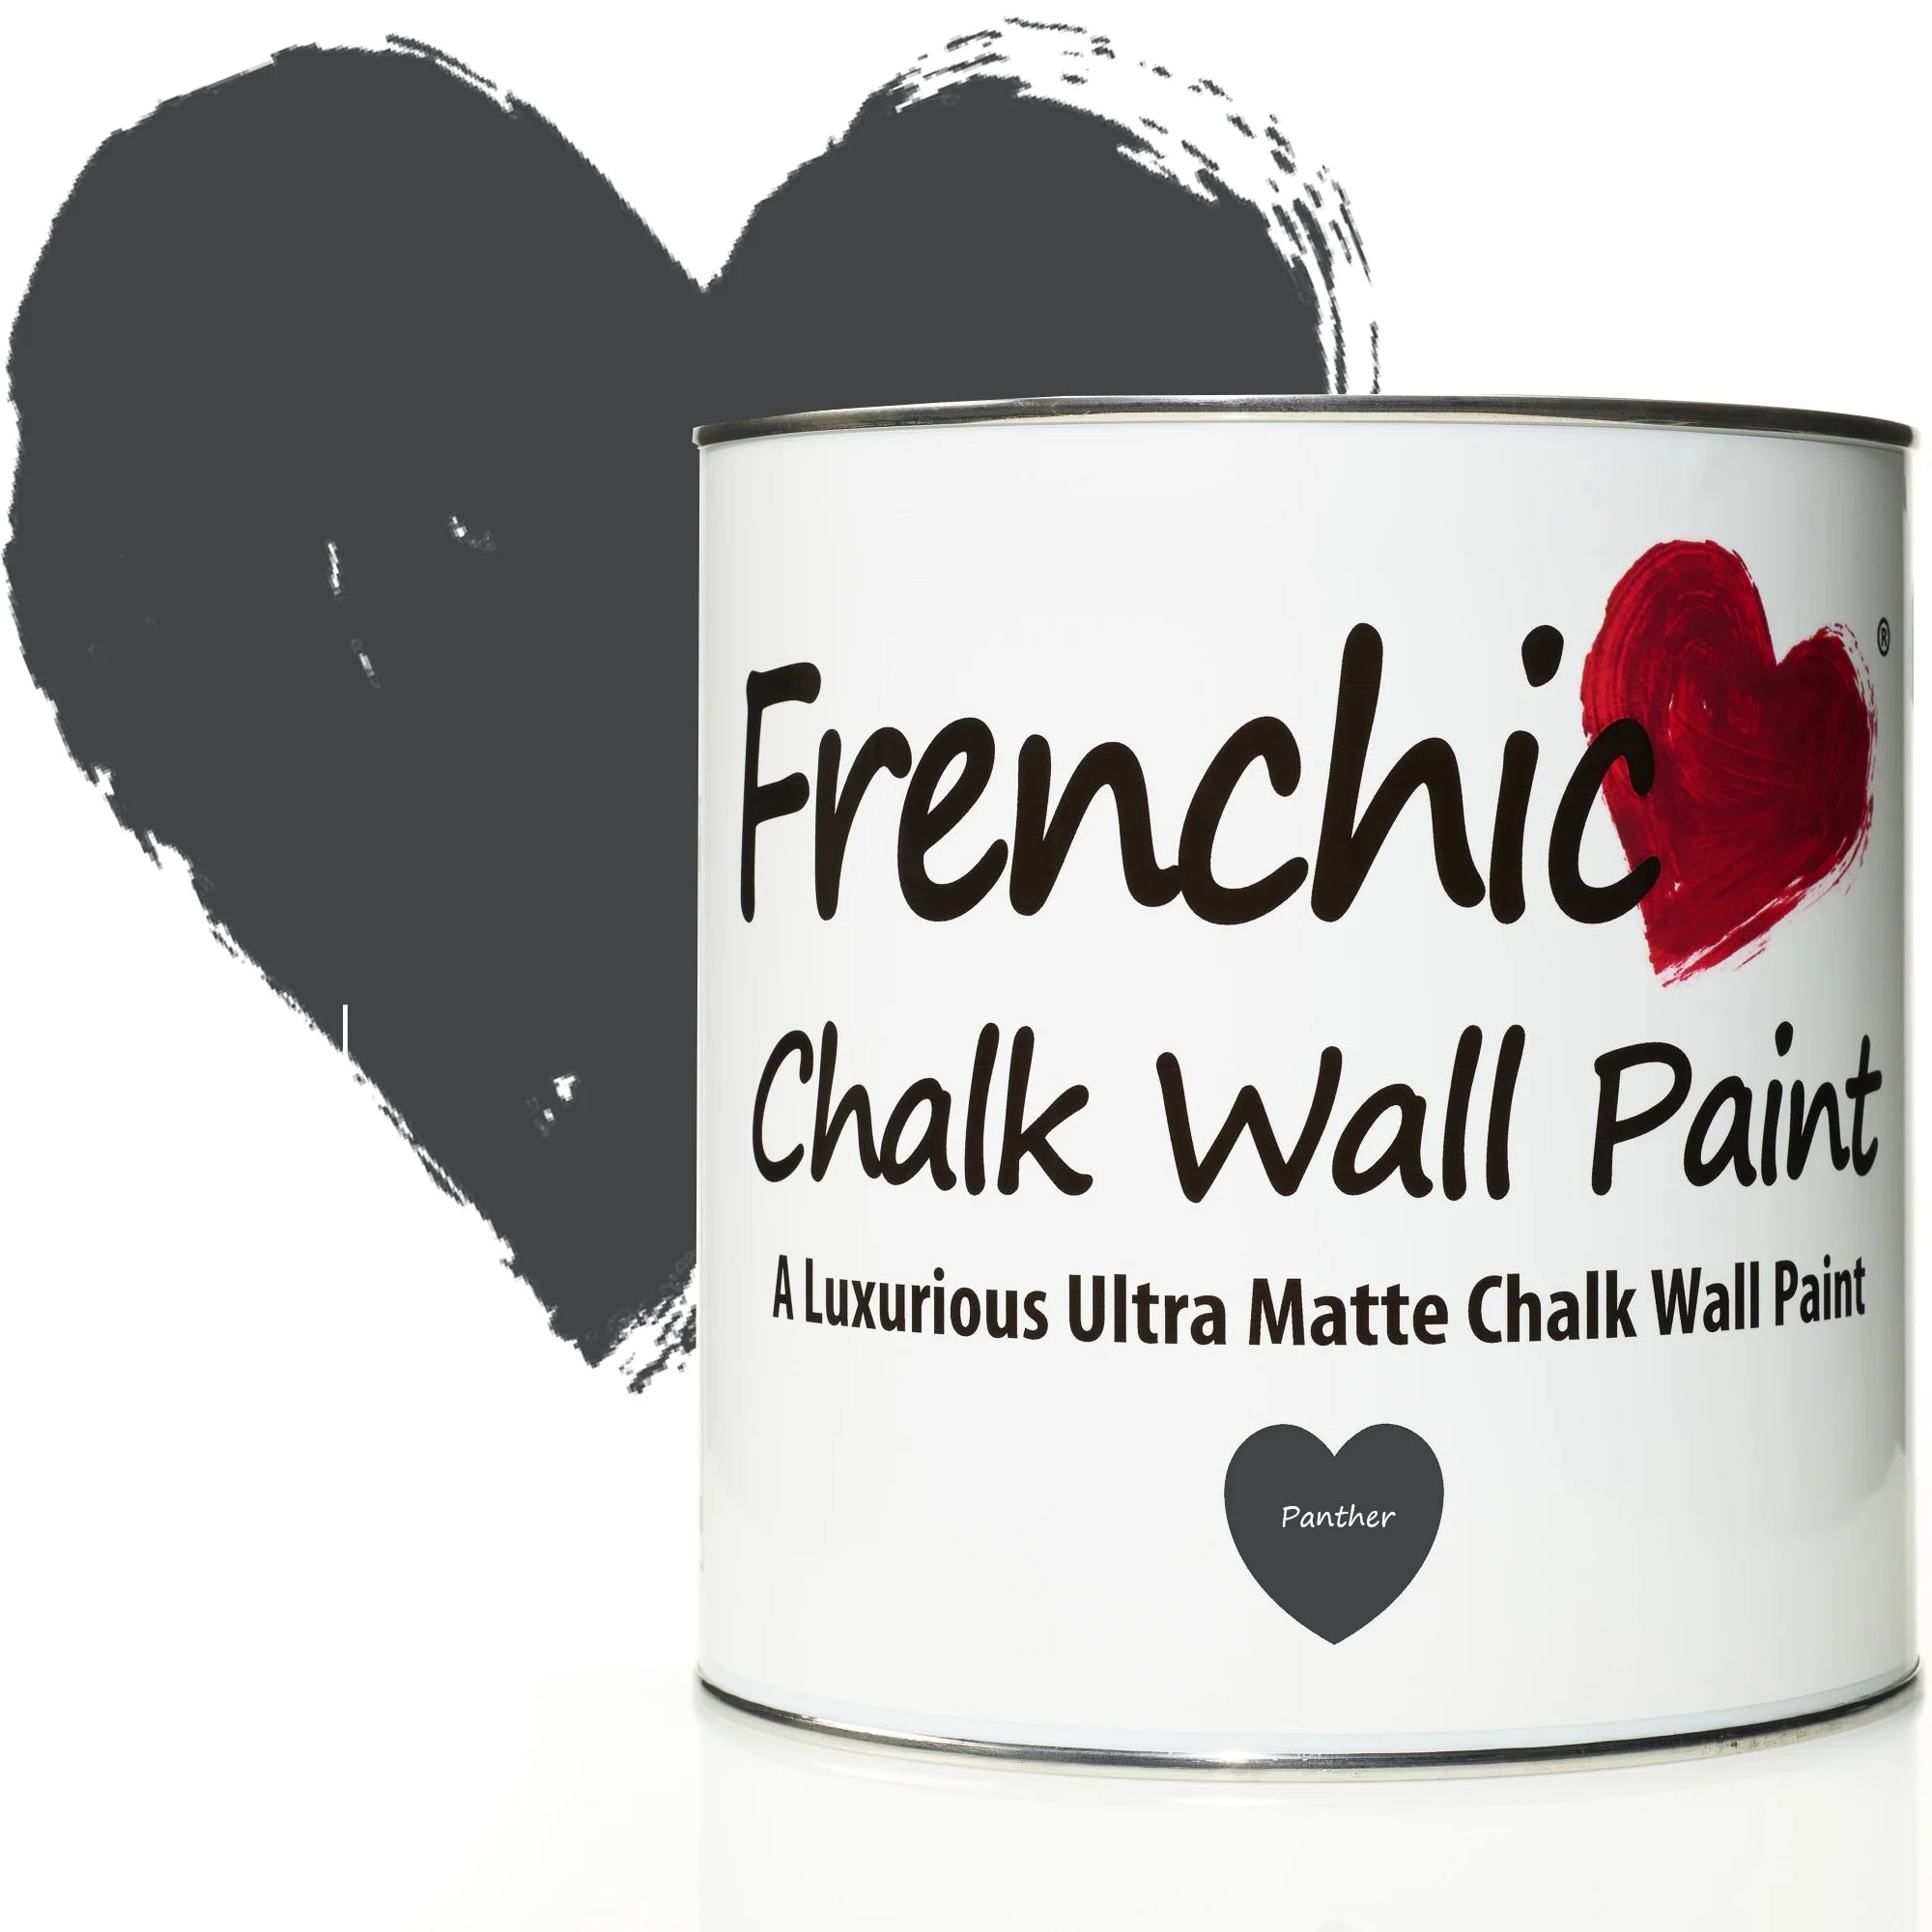 Frenchic Paint Panther Wall Paint 2.5L Frenchic Paint Chalk Wall Paint Range by Weirs of Baggot Street Irelands Largest and most Trusted Stockist of Frenchic Paint. Shop online for Nationwide and Same Day Dublin Delivery